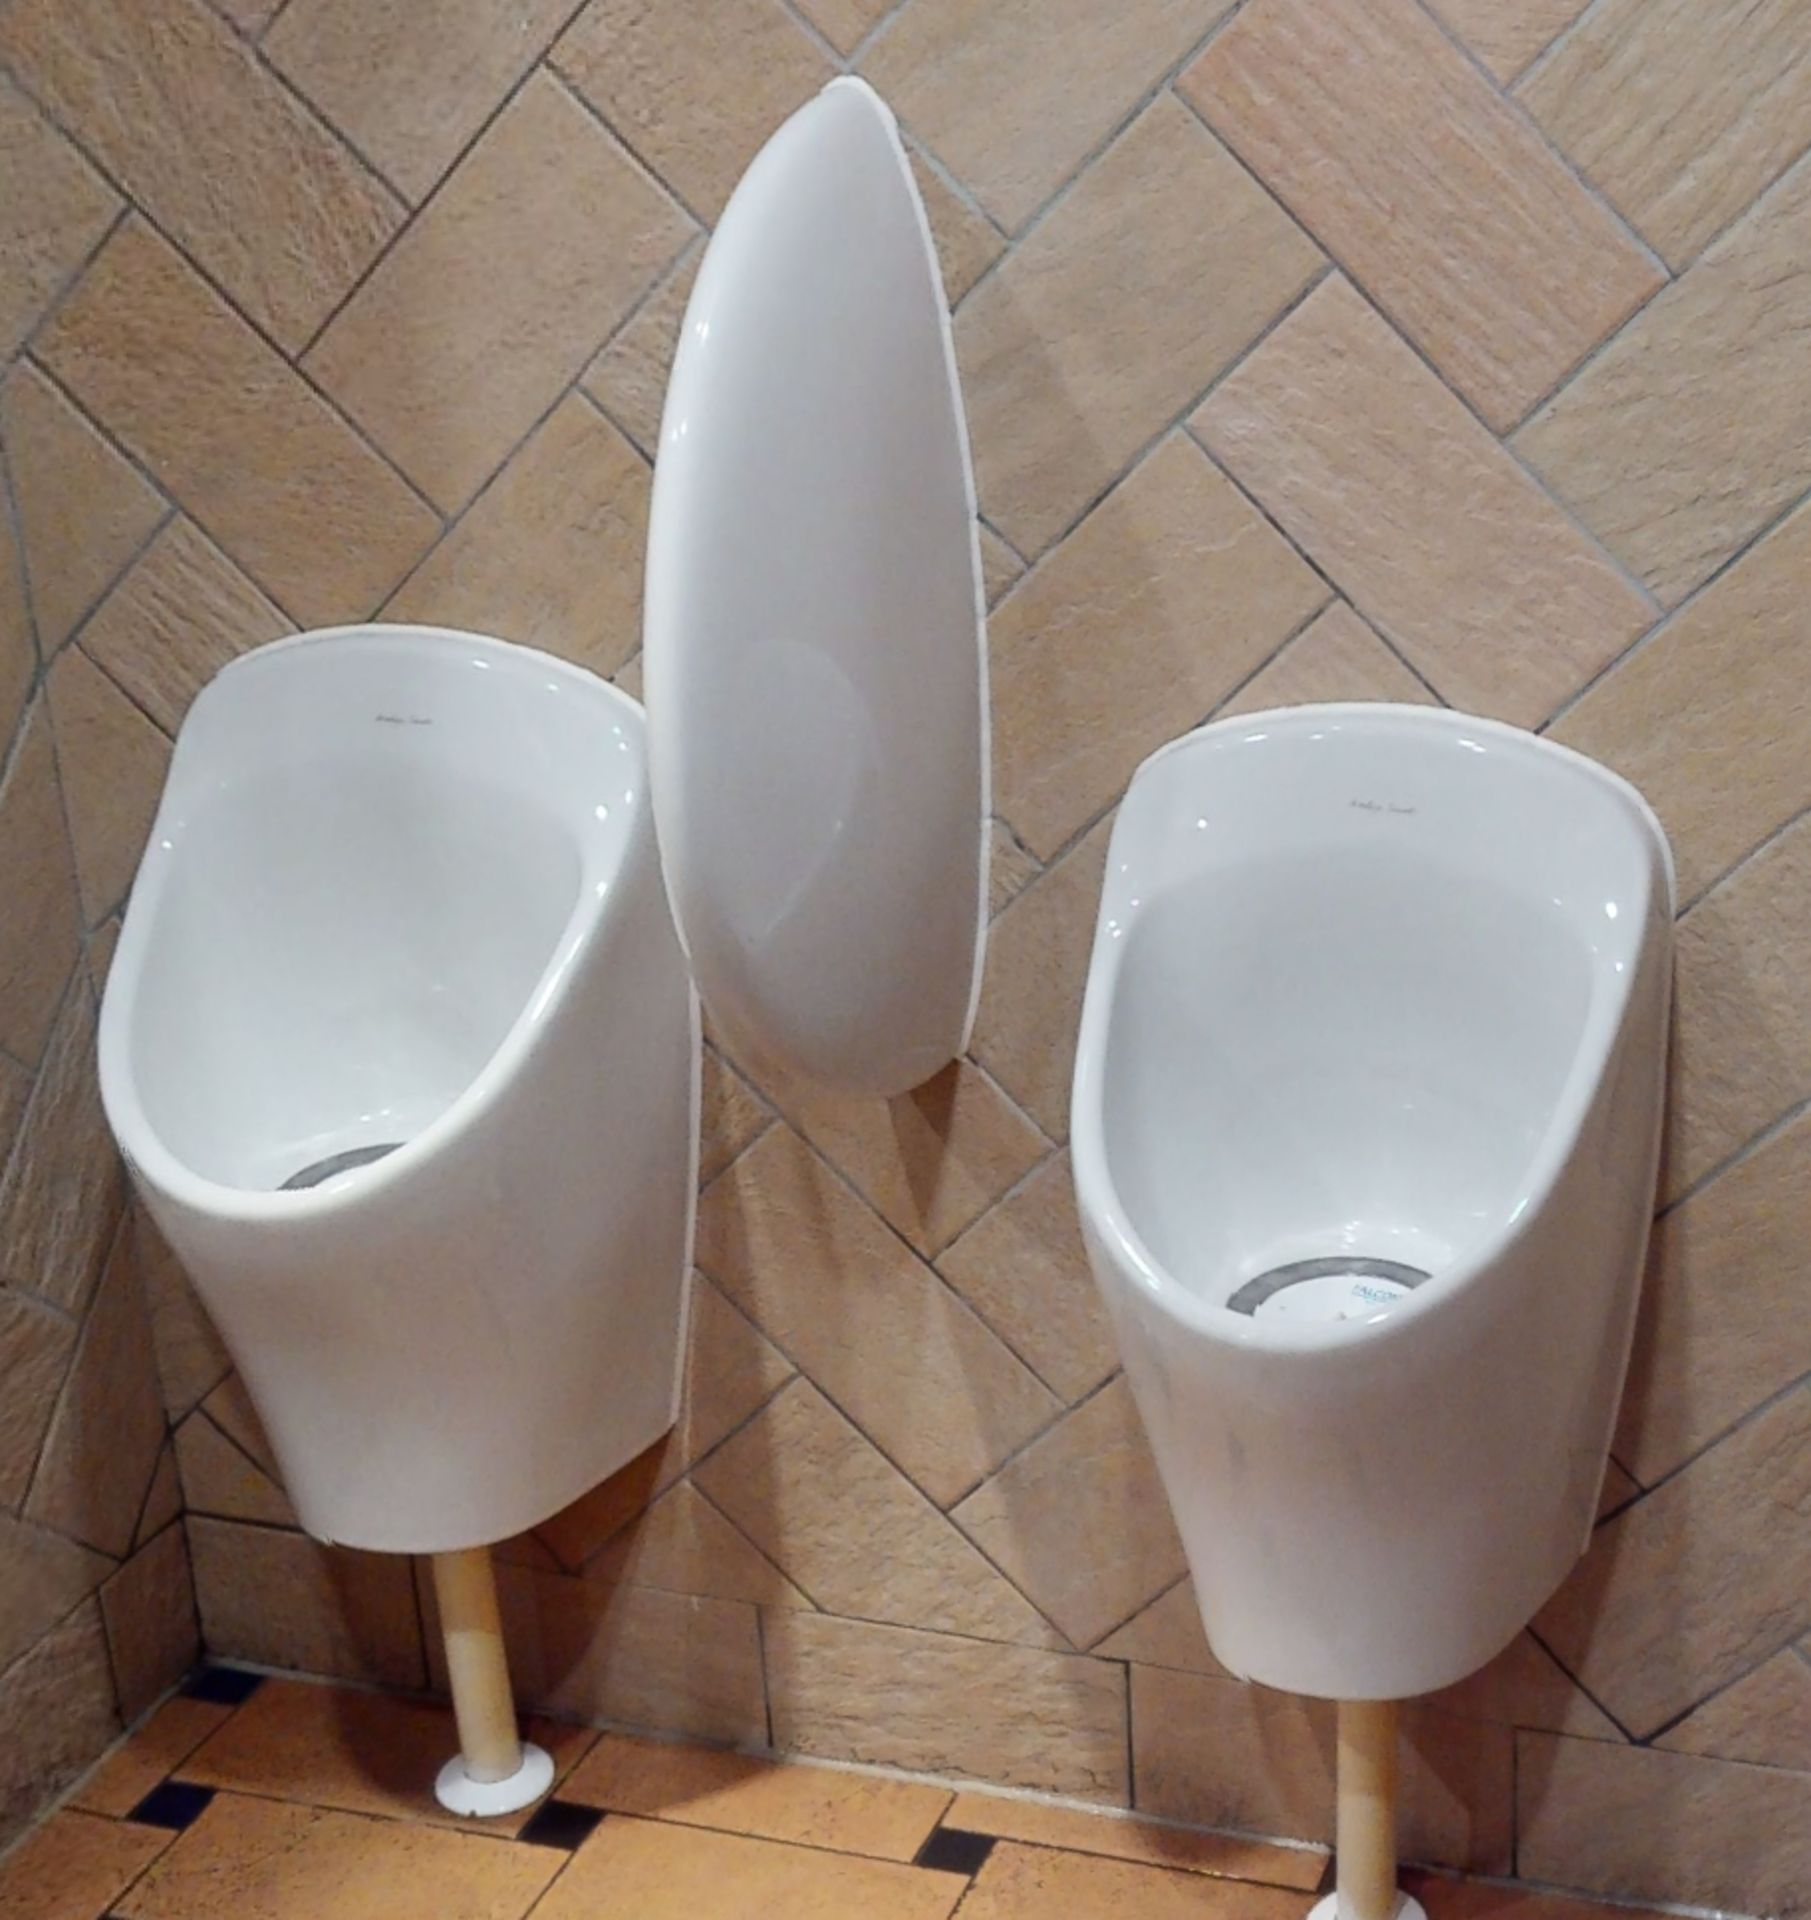 2 x Armitage Shanks Wall Mounted Toilet Urinals With Privacy Divider - Image 2 of 2